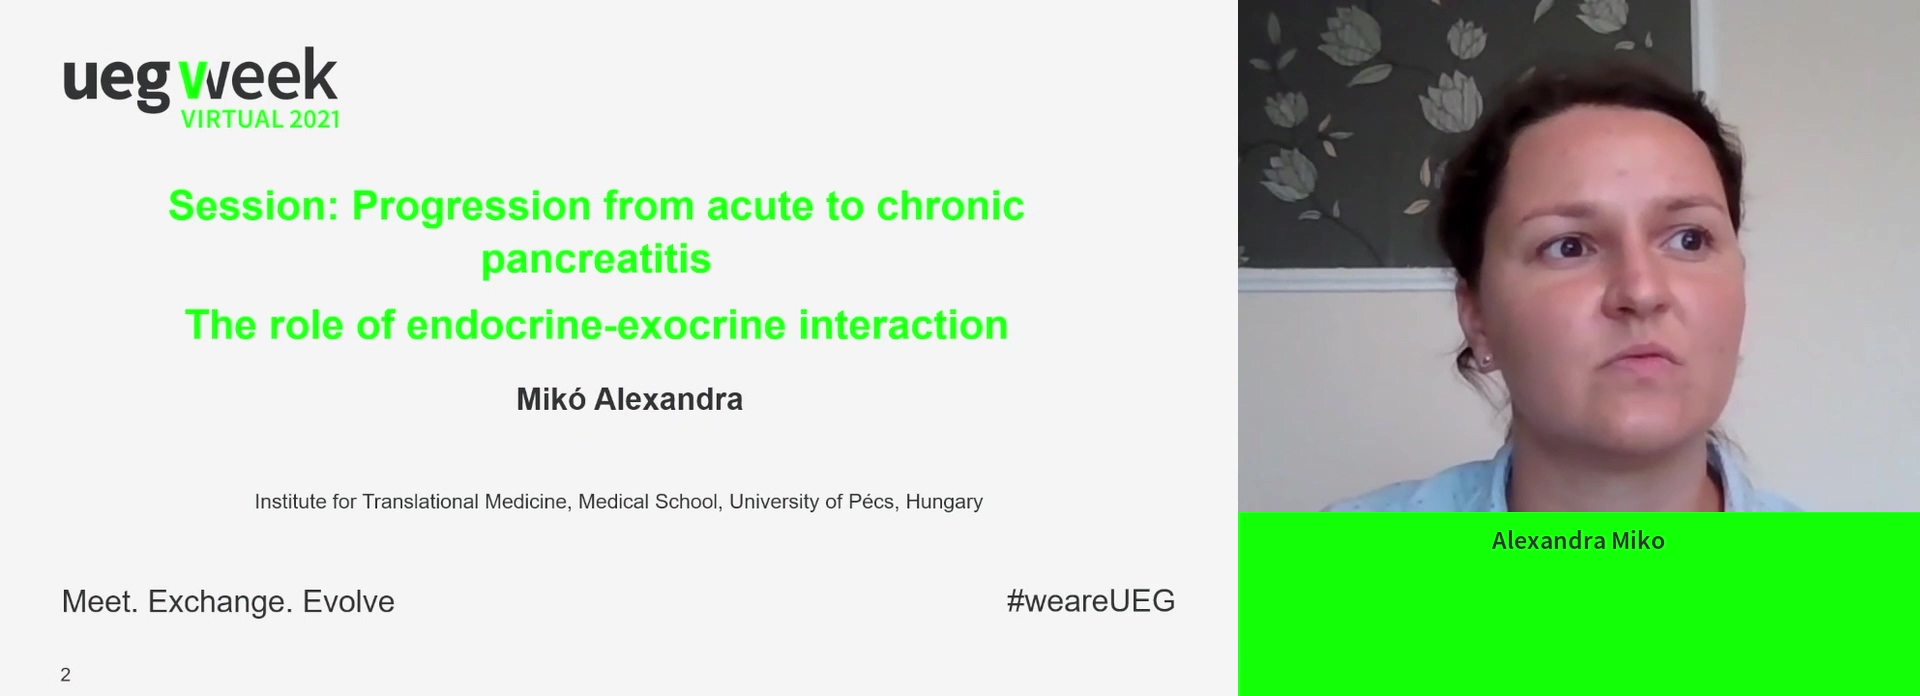 The role of endocrine-exocrine interaction